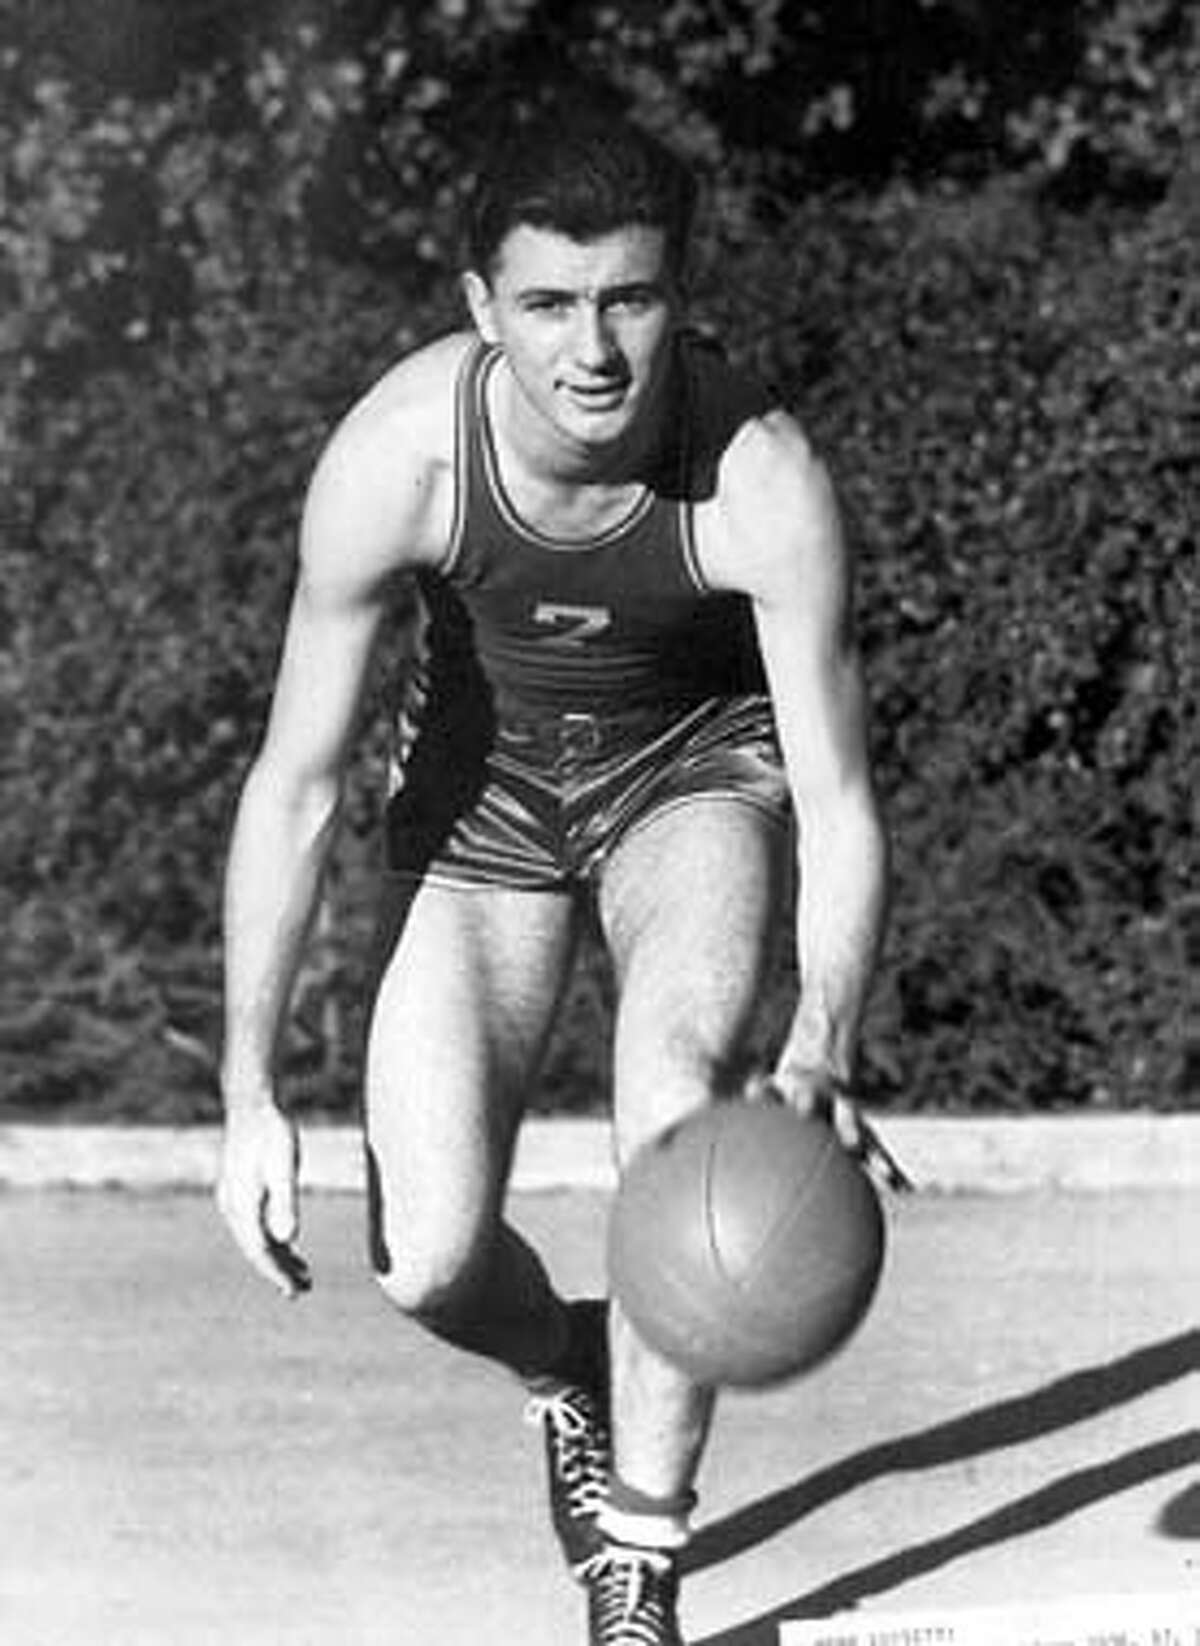 Hank Lucetti, of Stanford, Calif., University, poses with a basketball in this l940 photo. Like a lot of innovations, Hank Luisetti's pioneering one-handed set shot was born of necessity. No one knew it at the time but Luisetti had developed the precursor to the jump shot that dominates the game today. (AP Photo/Stanford University, HO)